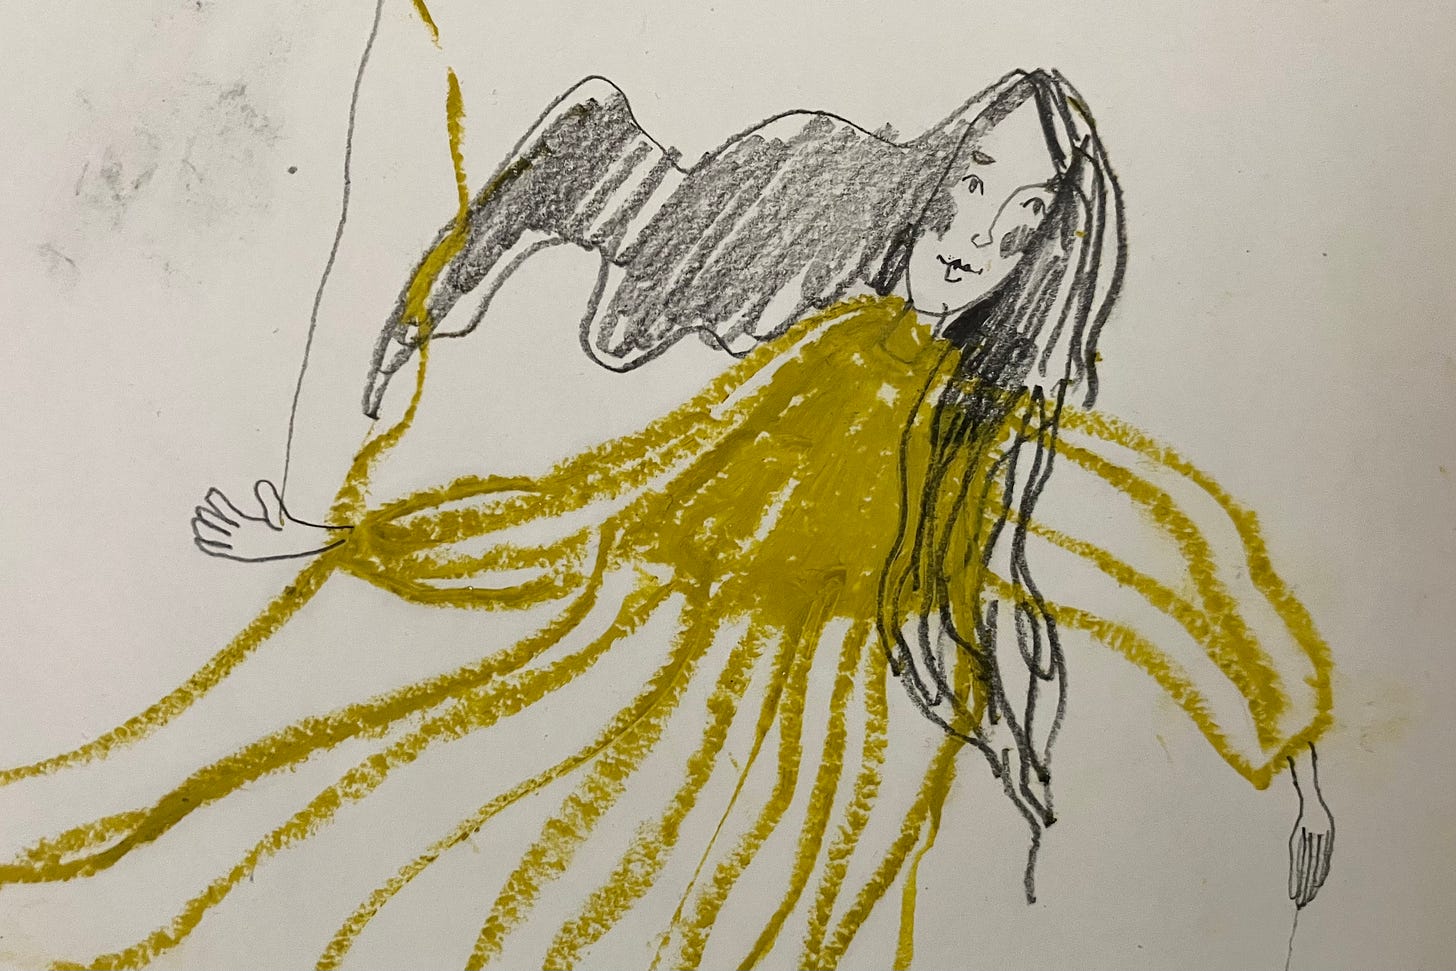 An illustration of a woman with long hair. She is wearing a mustard yellow dress. She has lots of energy as if she is connected with all things